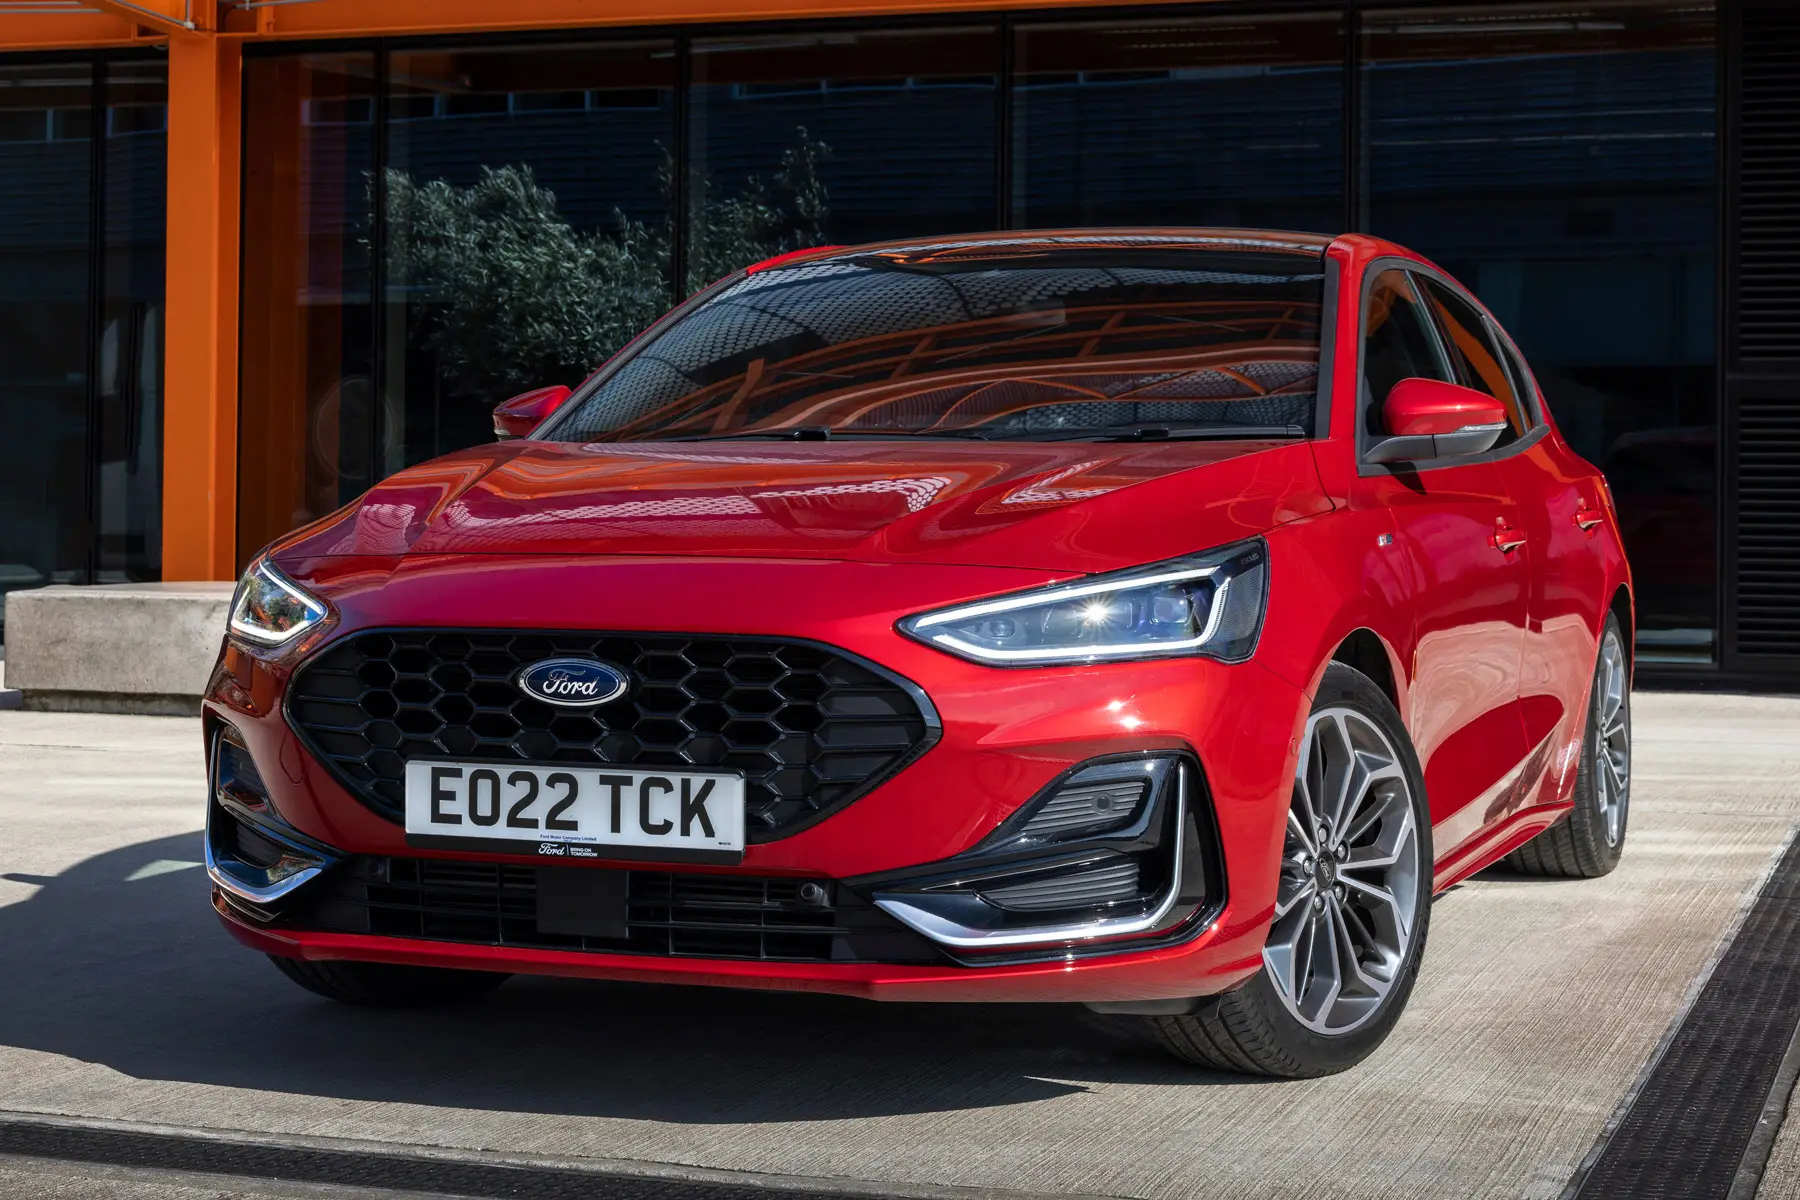 First Drive: 2021 Ford Focus ST Review